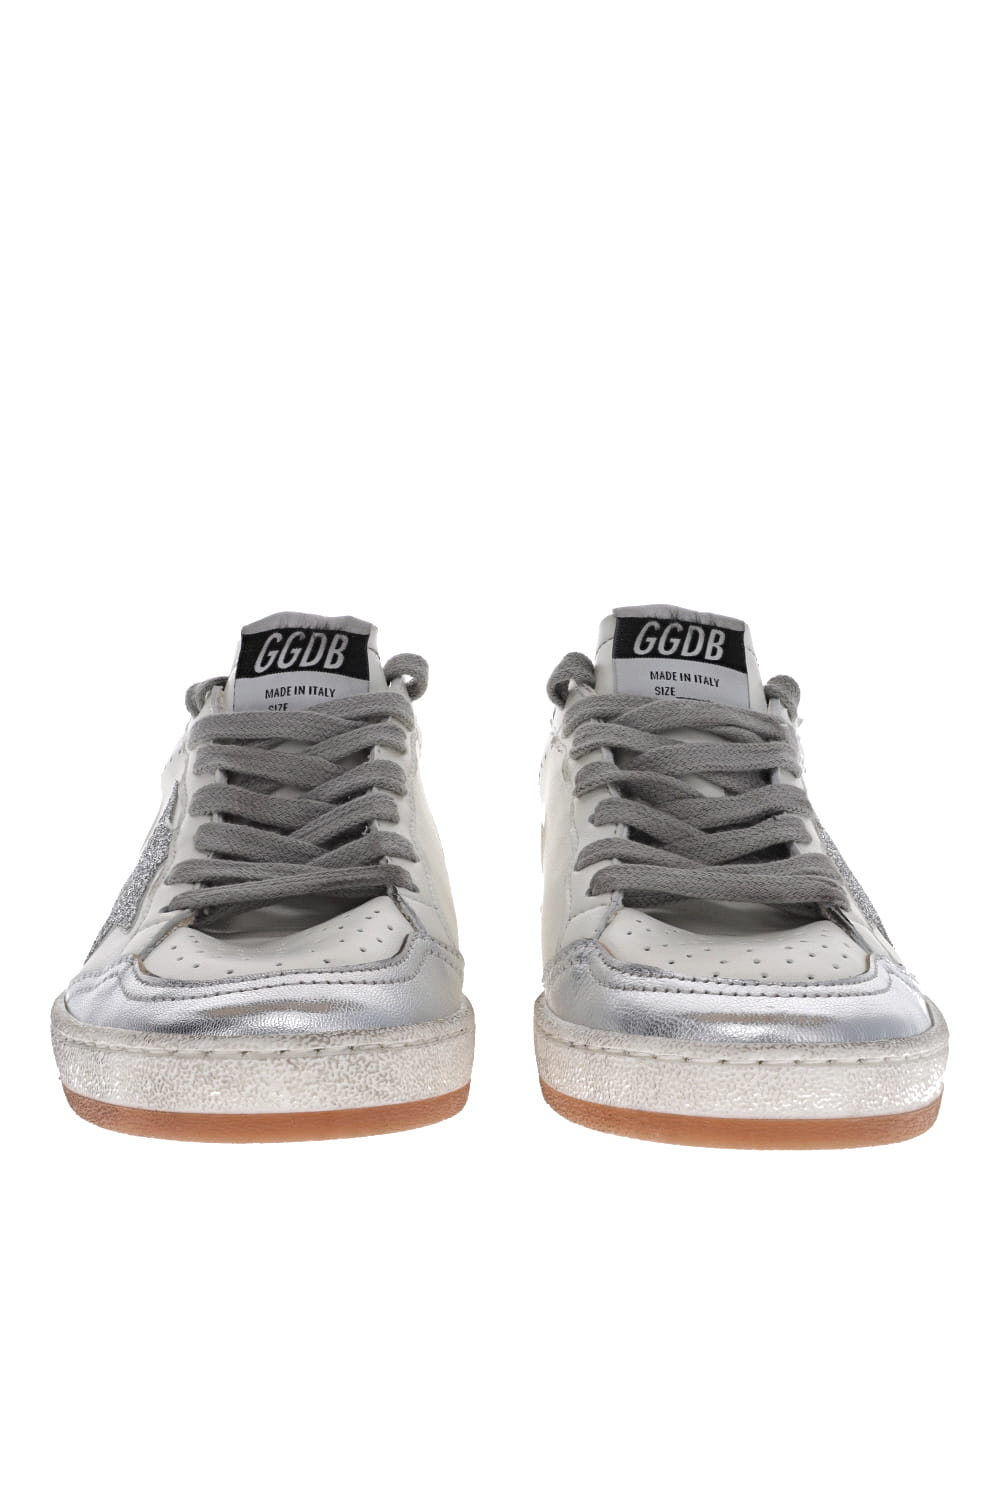 Golden Goose BALLSTAR NAPPA UPPER CRYSTAL STAR NAPPA AND LEATHER HEEL CRACK SPUR GWF00117.F005365.11707 WHITE/SILVER/AQUA GRAY/ ORCHID HUSH